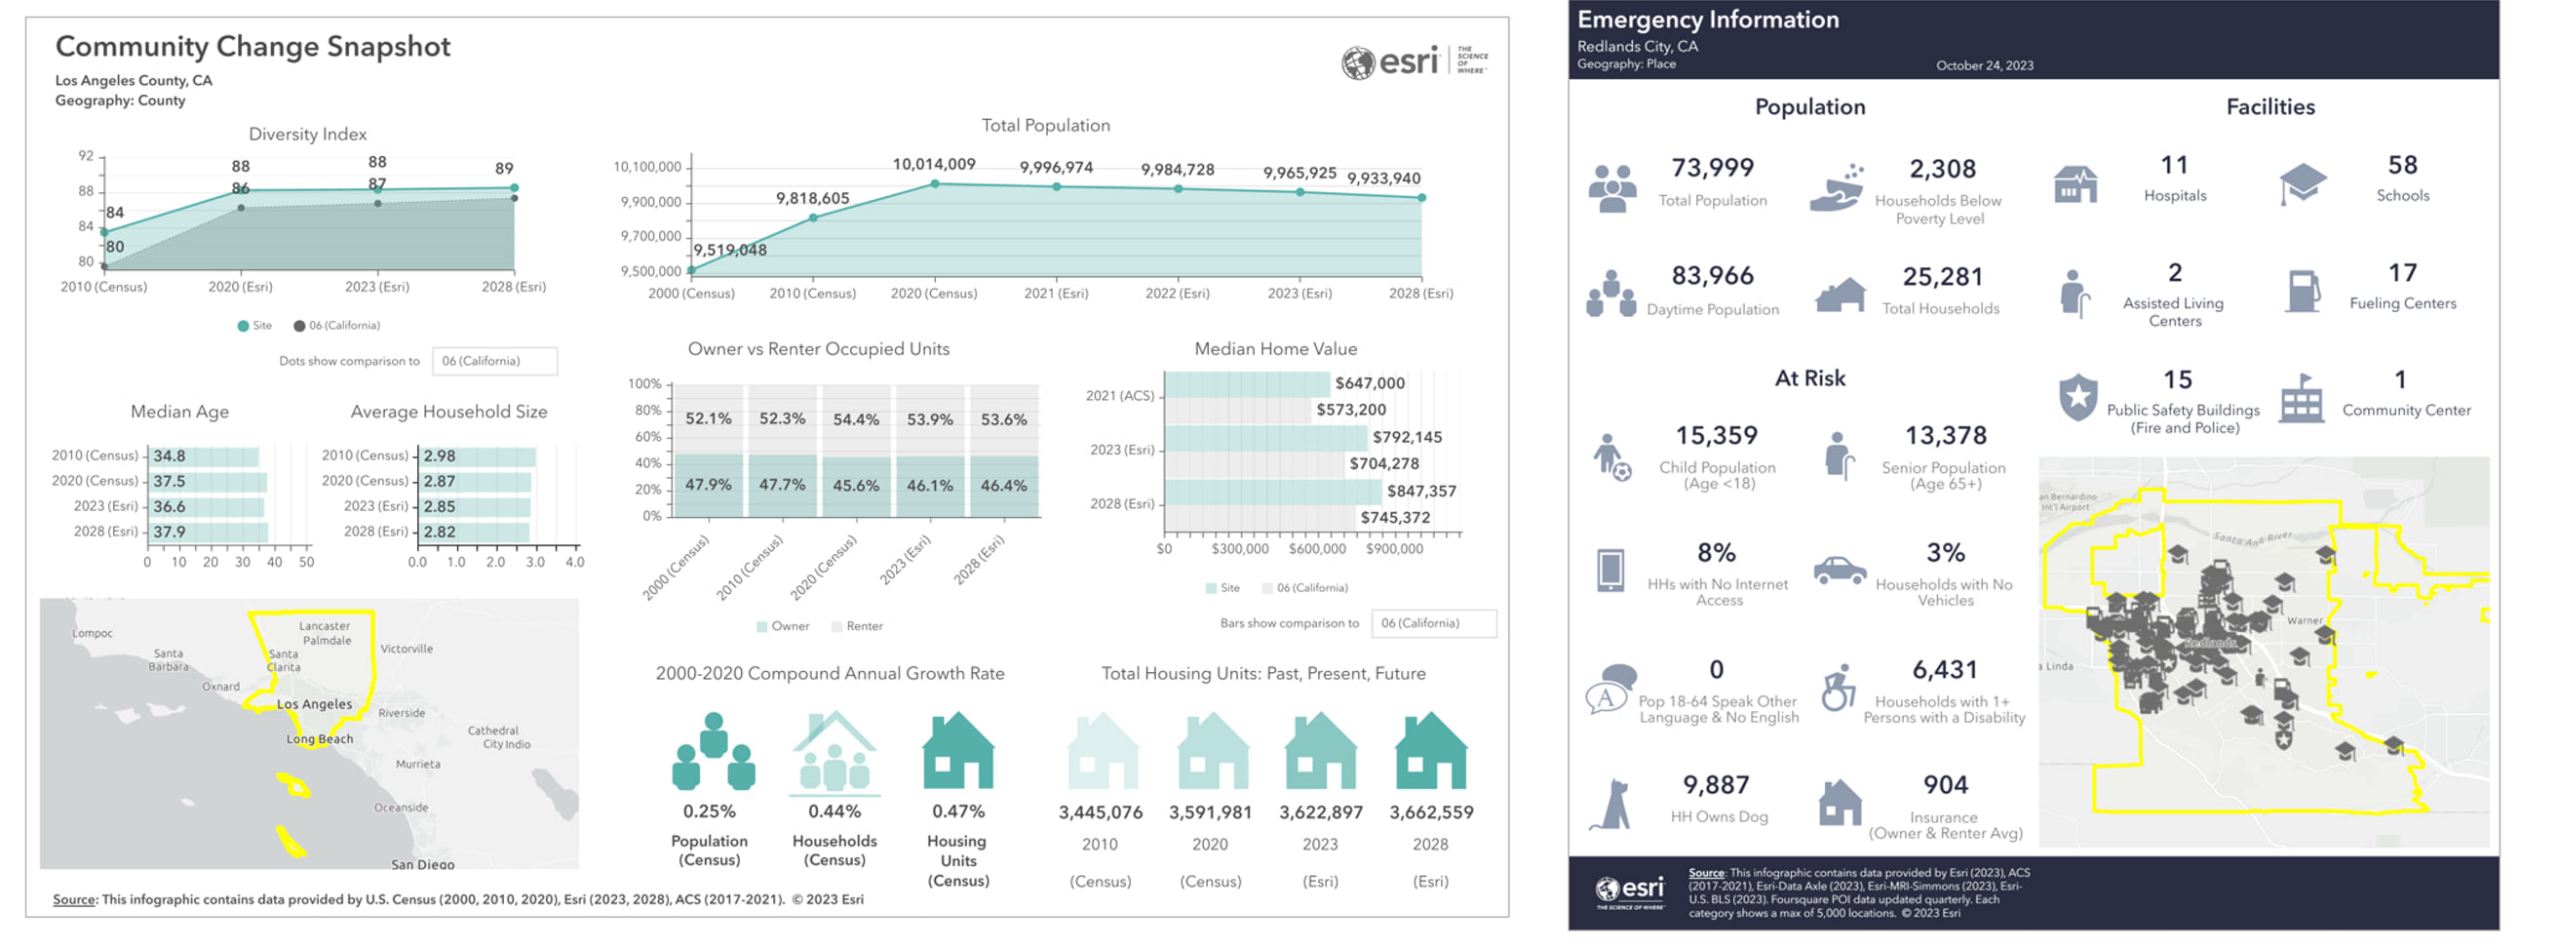 Community Change Snapshot infographic showing Los Angeles County data next to Emergency Information infographic showing City of Redlands, California data. Both infographics included in the November update of ArcGIS Business Analyst.